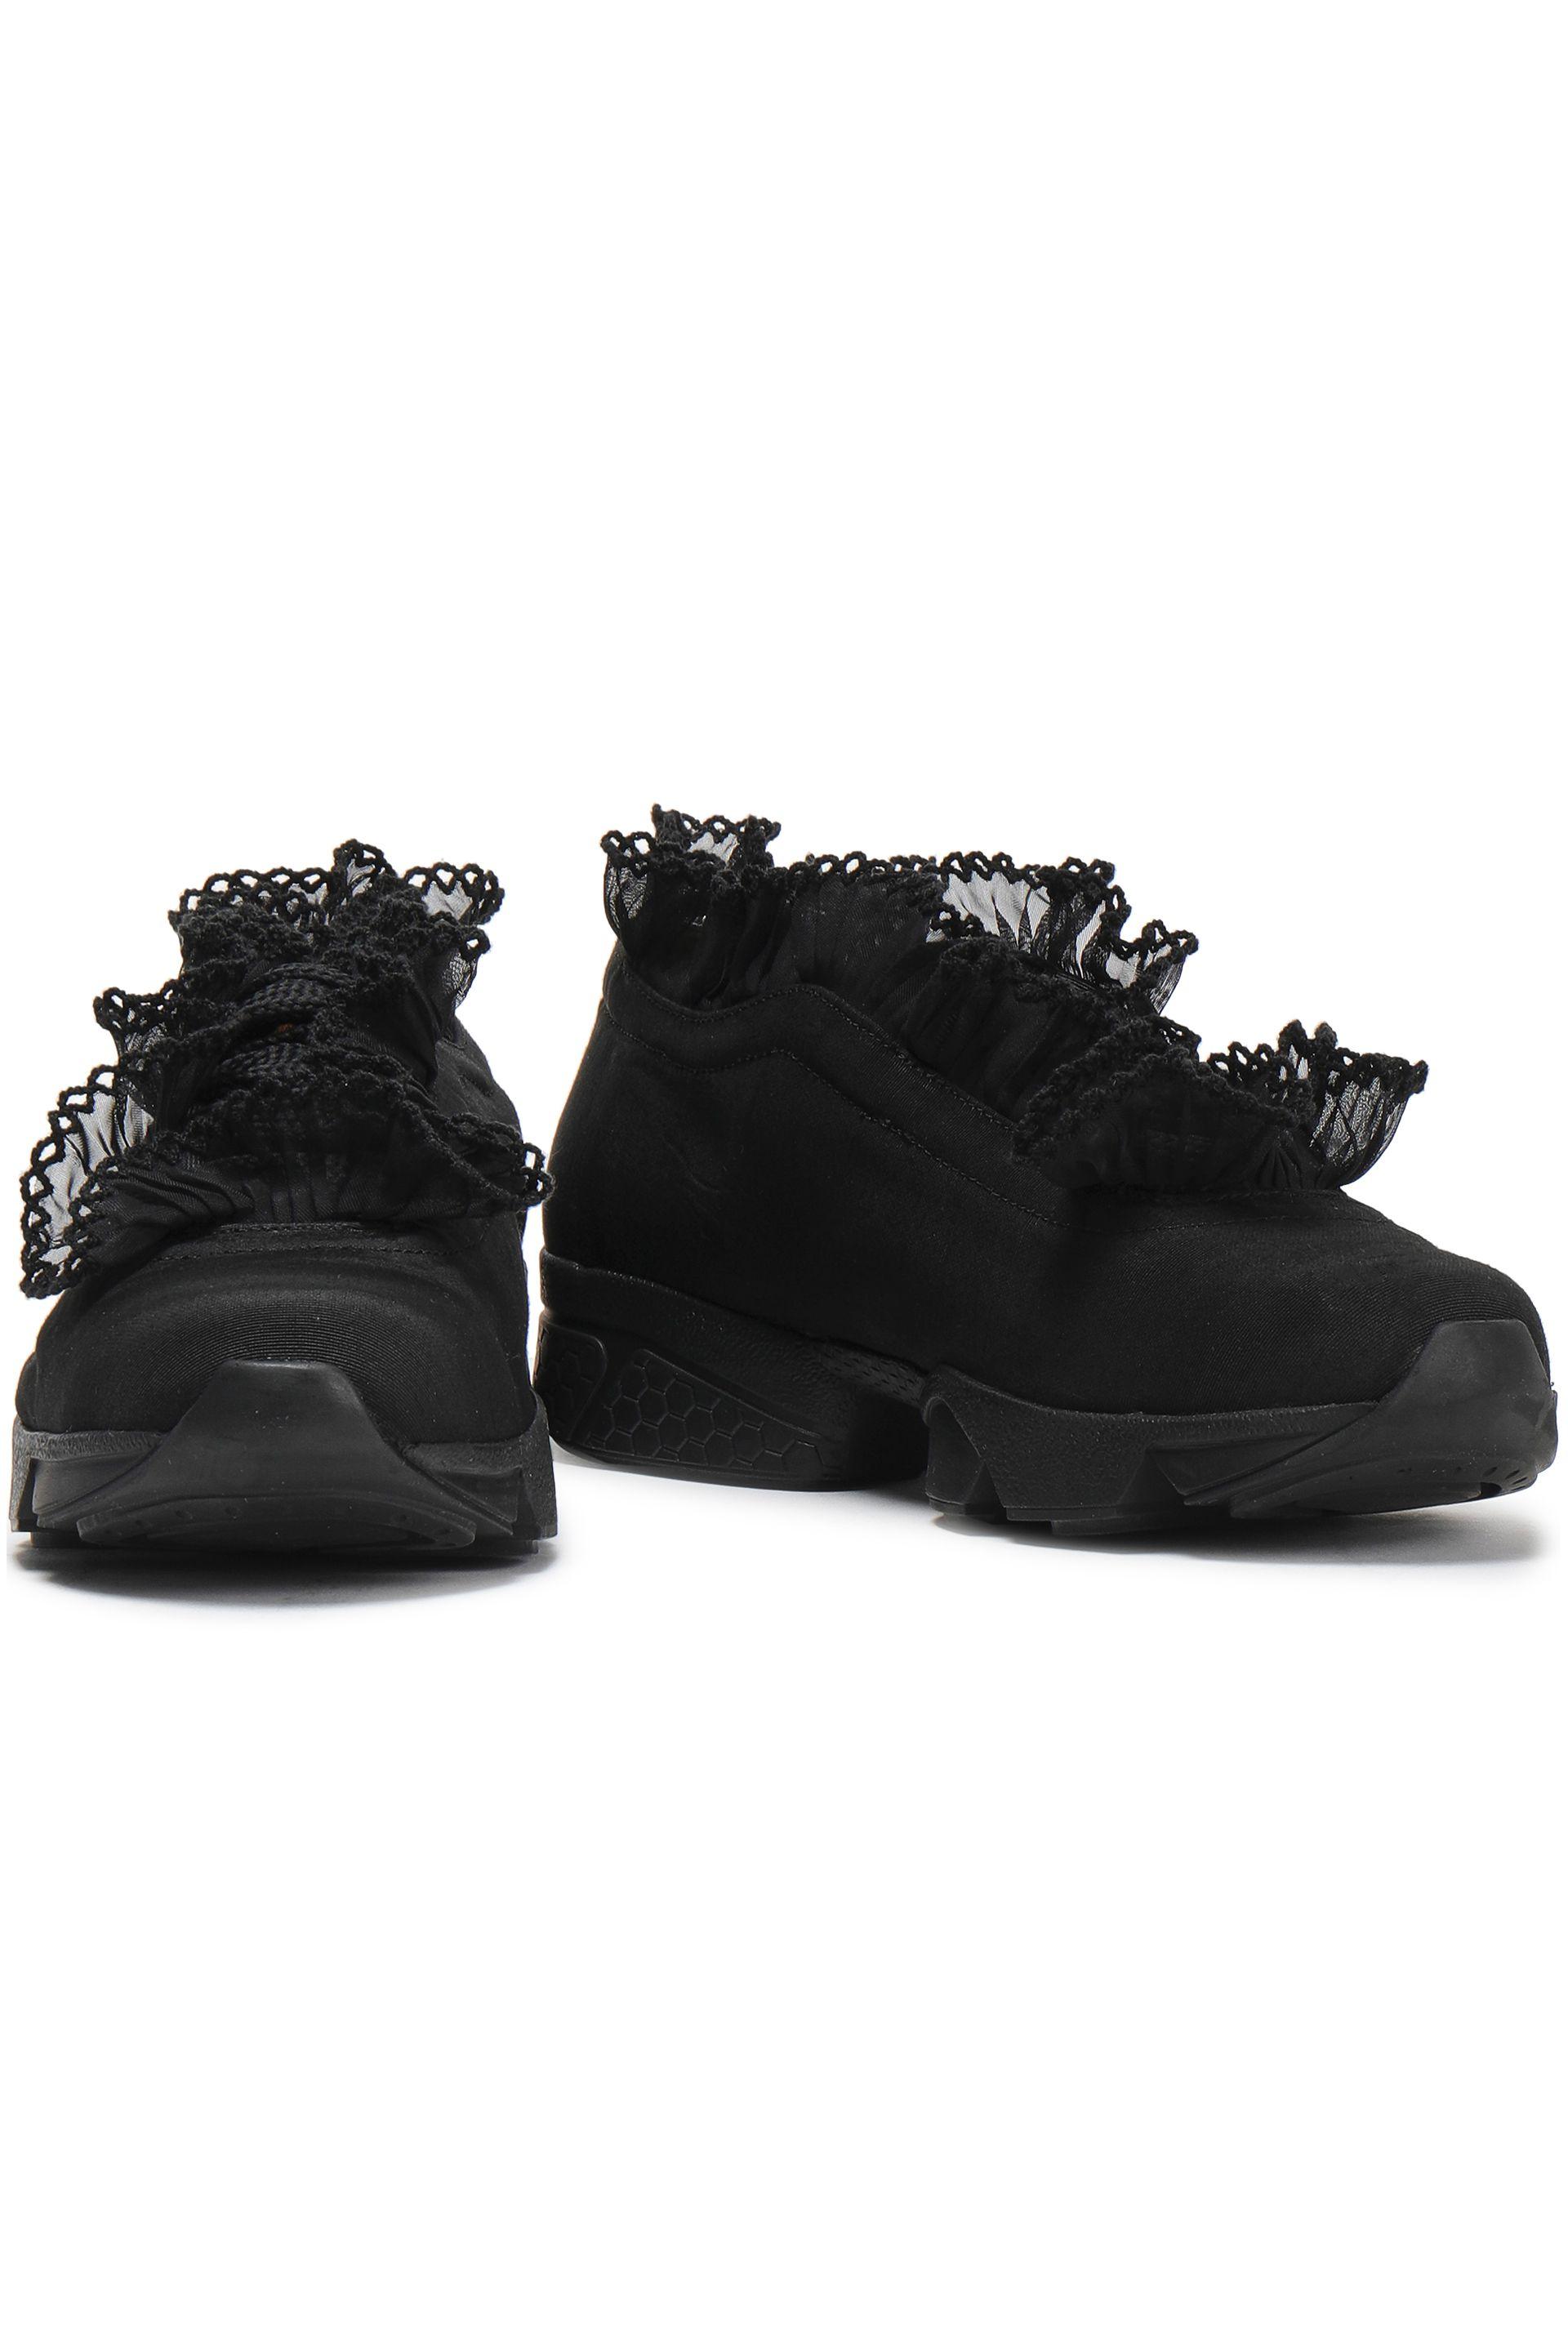 Ganni Leather Harriet Ruffle-trimmed Satin-faille Sneakers in Black - Lyst